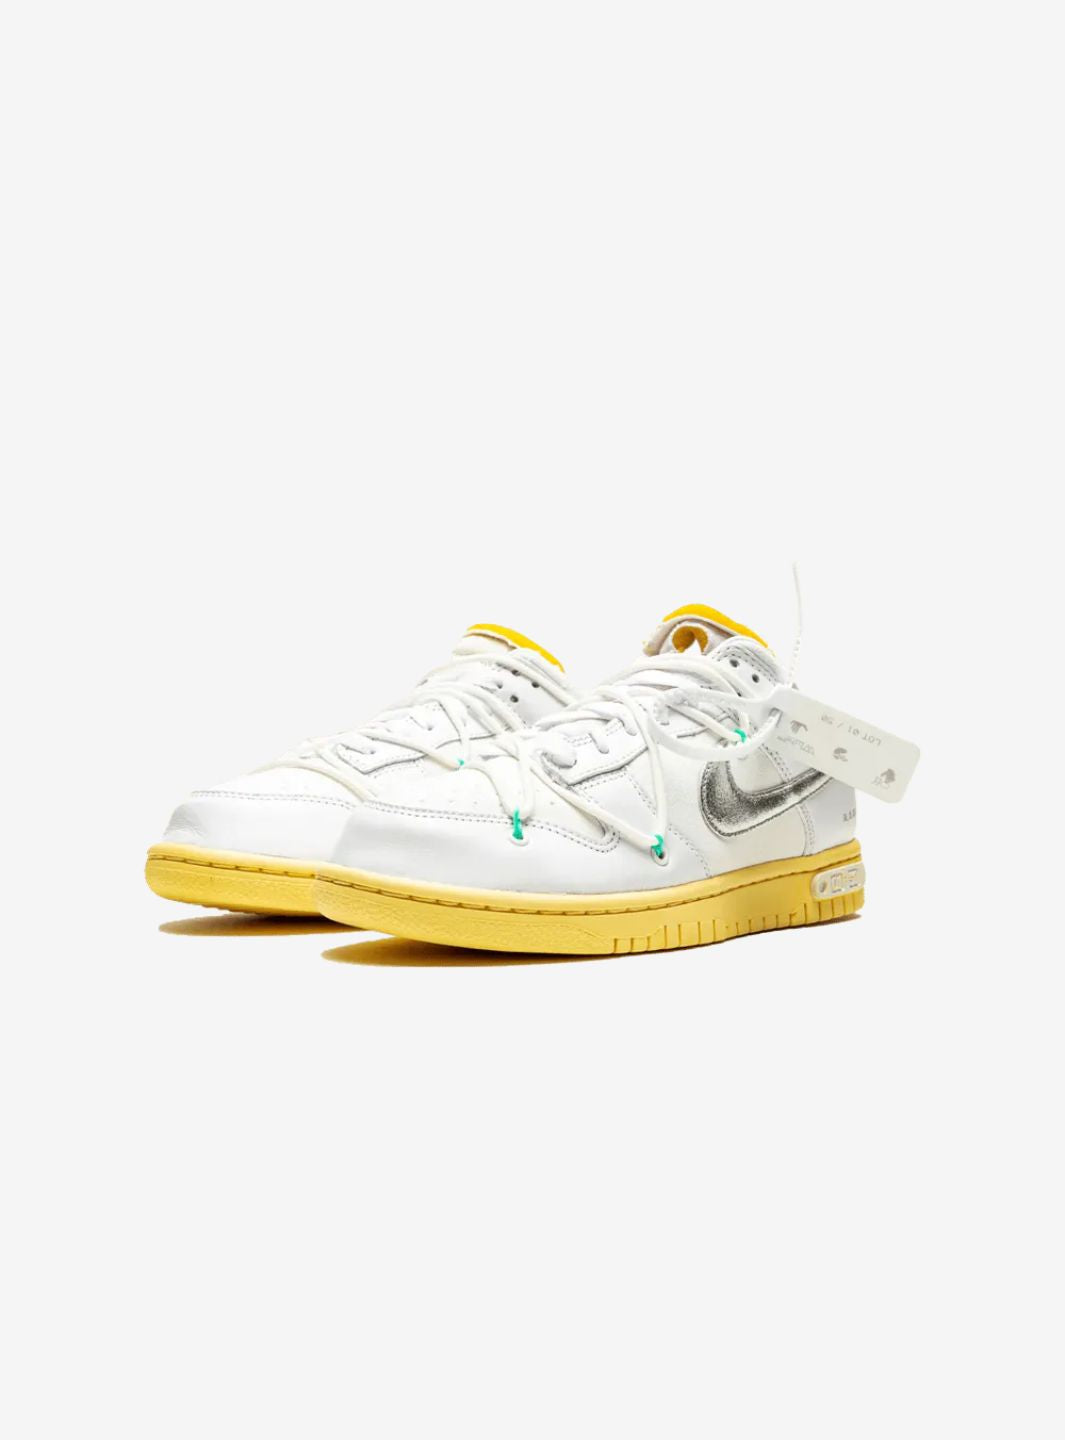 Nike Dunk Low Off-White Lot 1 - DM1602-127 | ResellZone